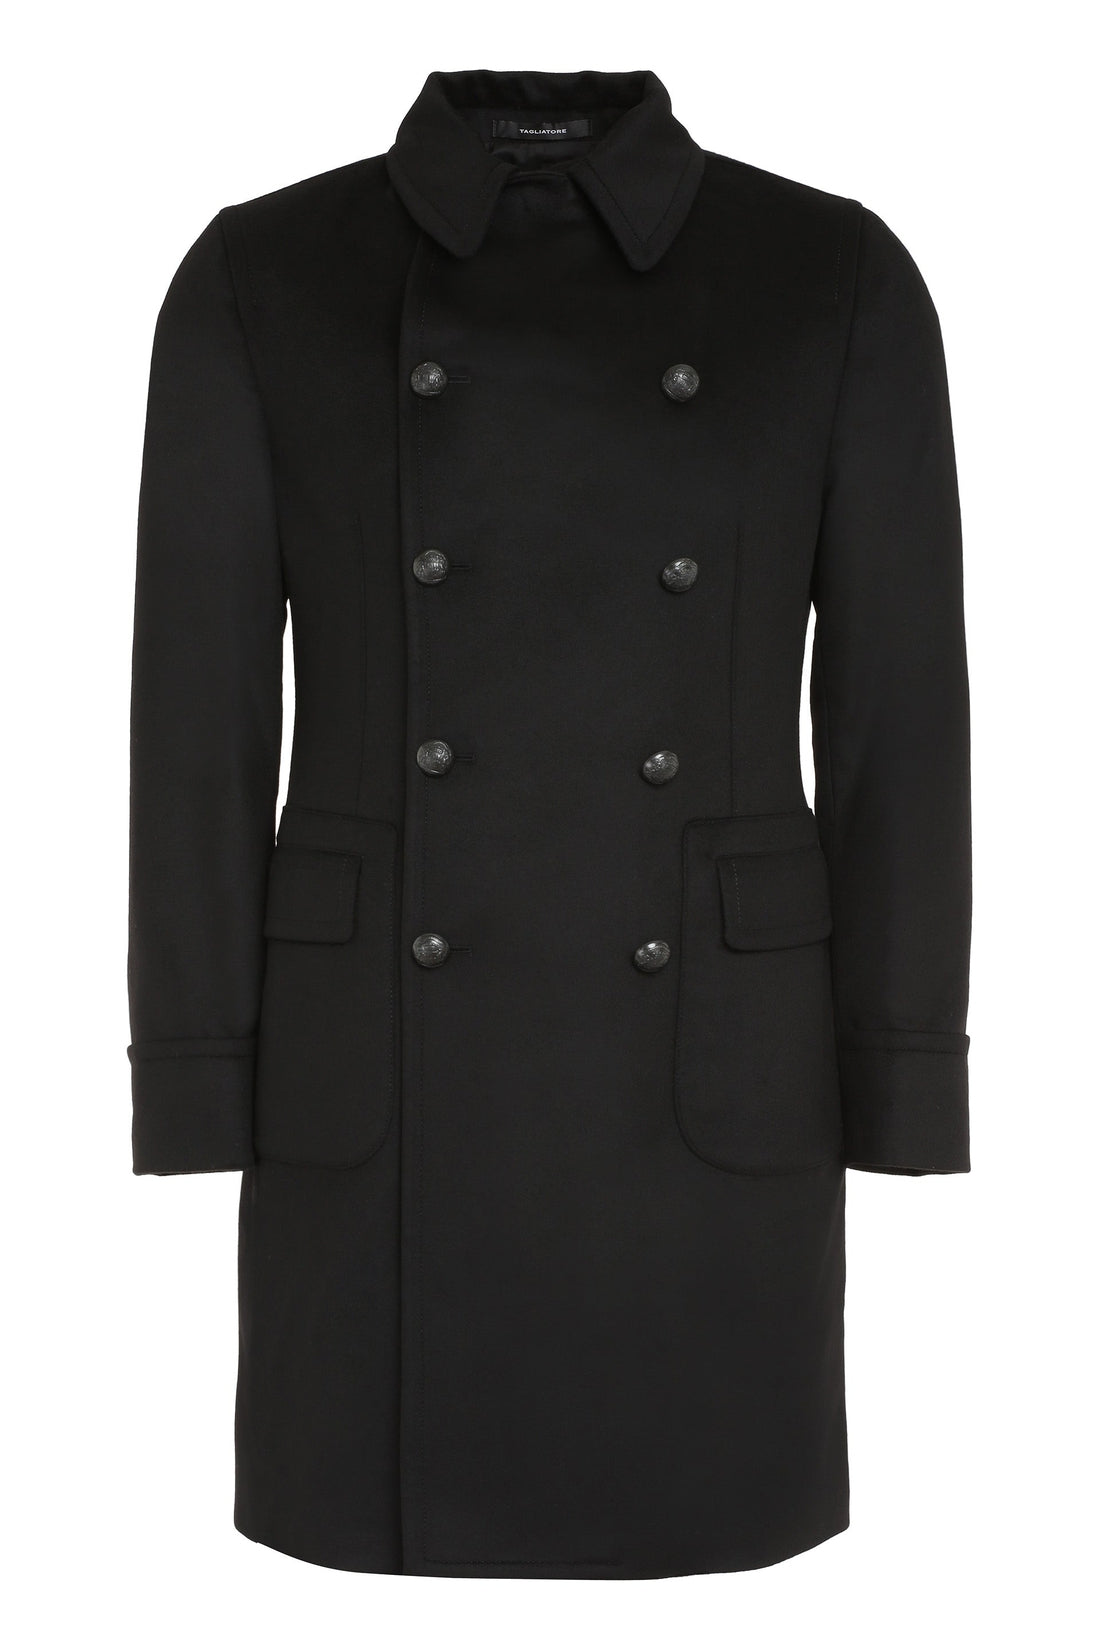 Tagliatore-OUTLET-SALE-Carlo double-breasted wool coat-ARCHIVIST